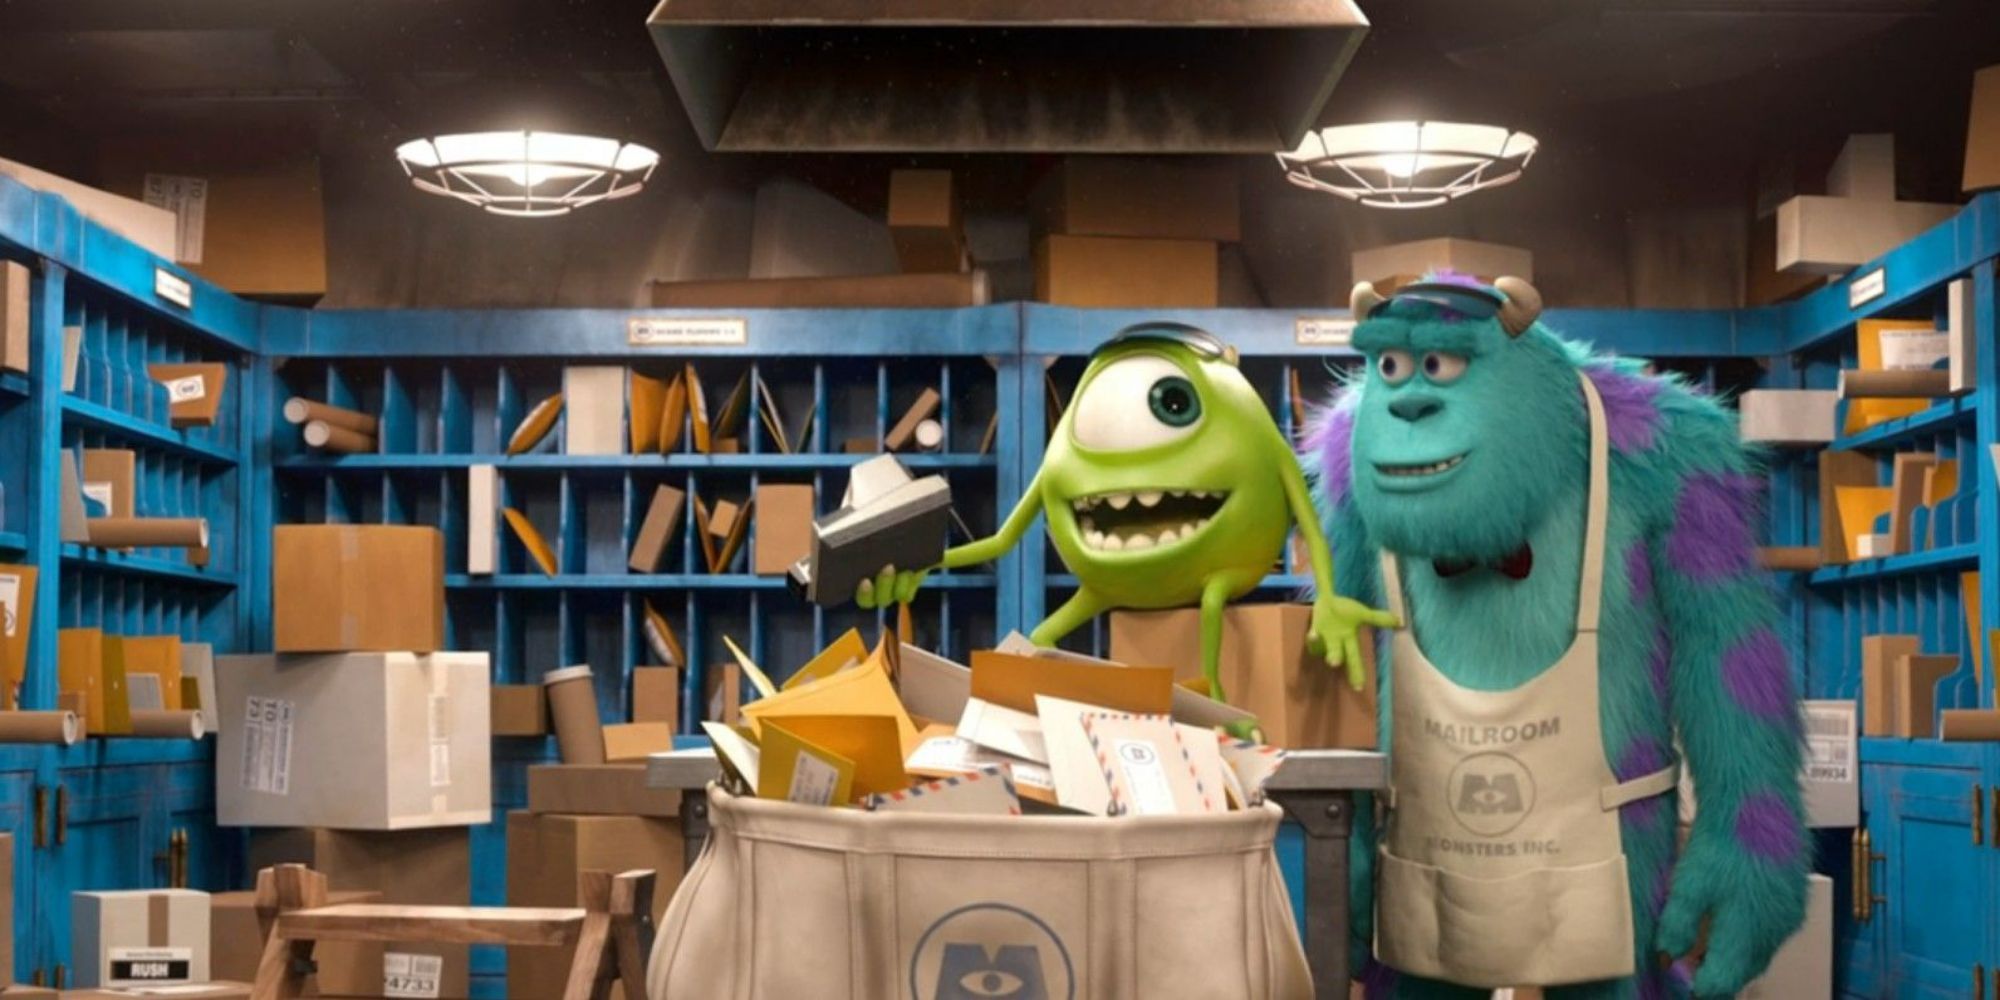 Mike and Sully work in a mail room in Monsters University (1)